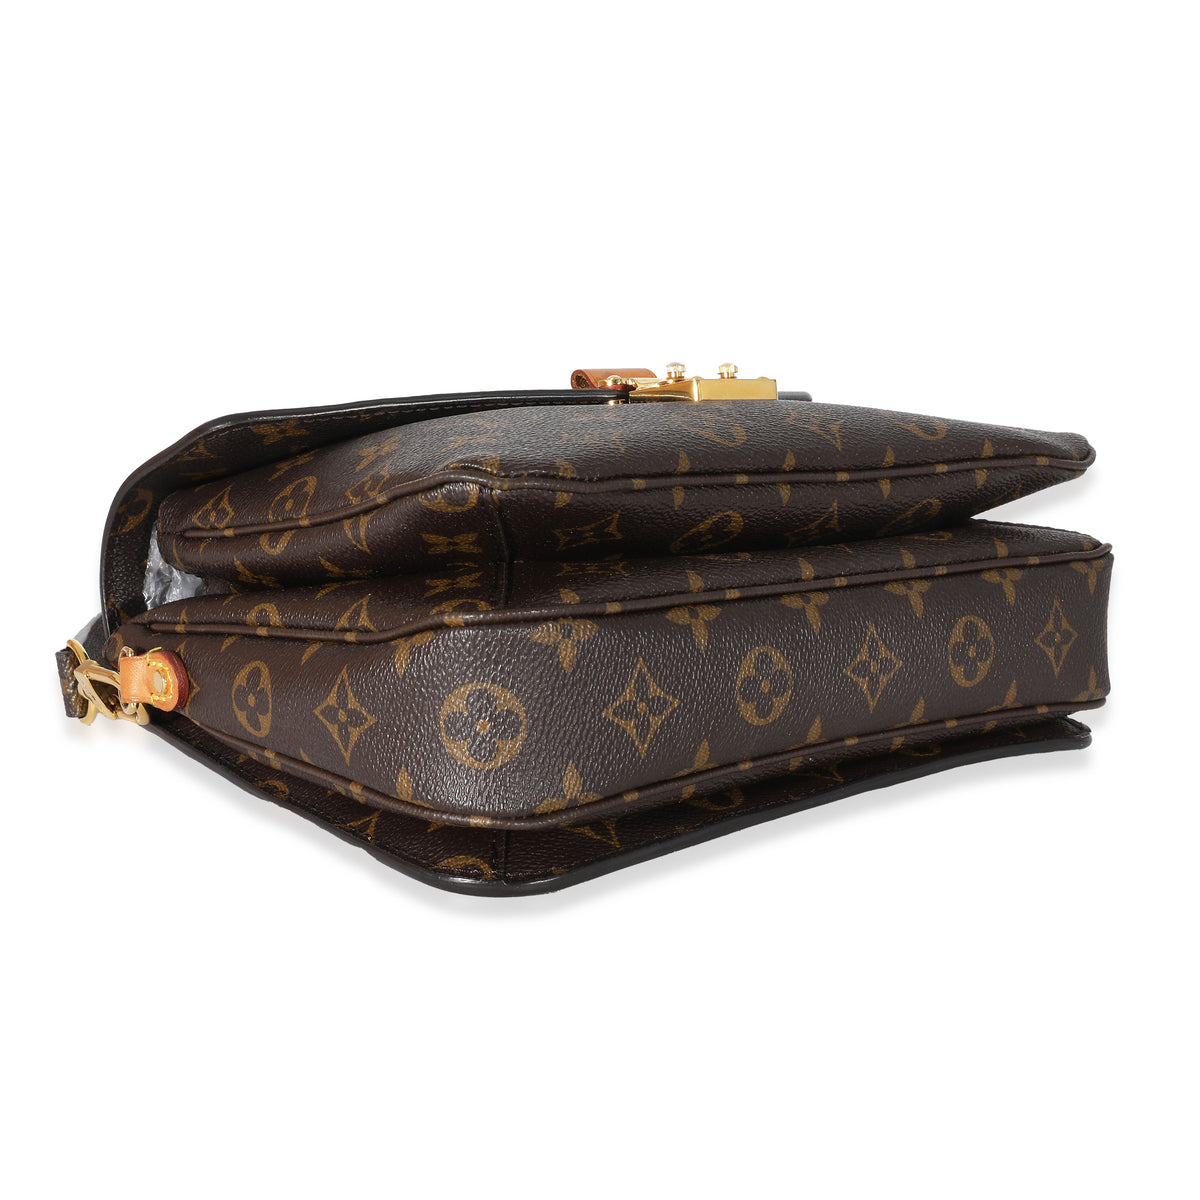 Top 10 Favorite Purchases of 2017 - Louis Vuitton Pochette Metis